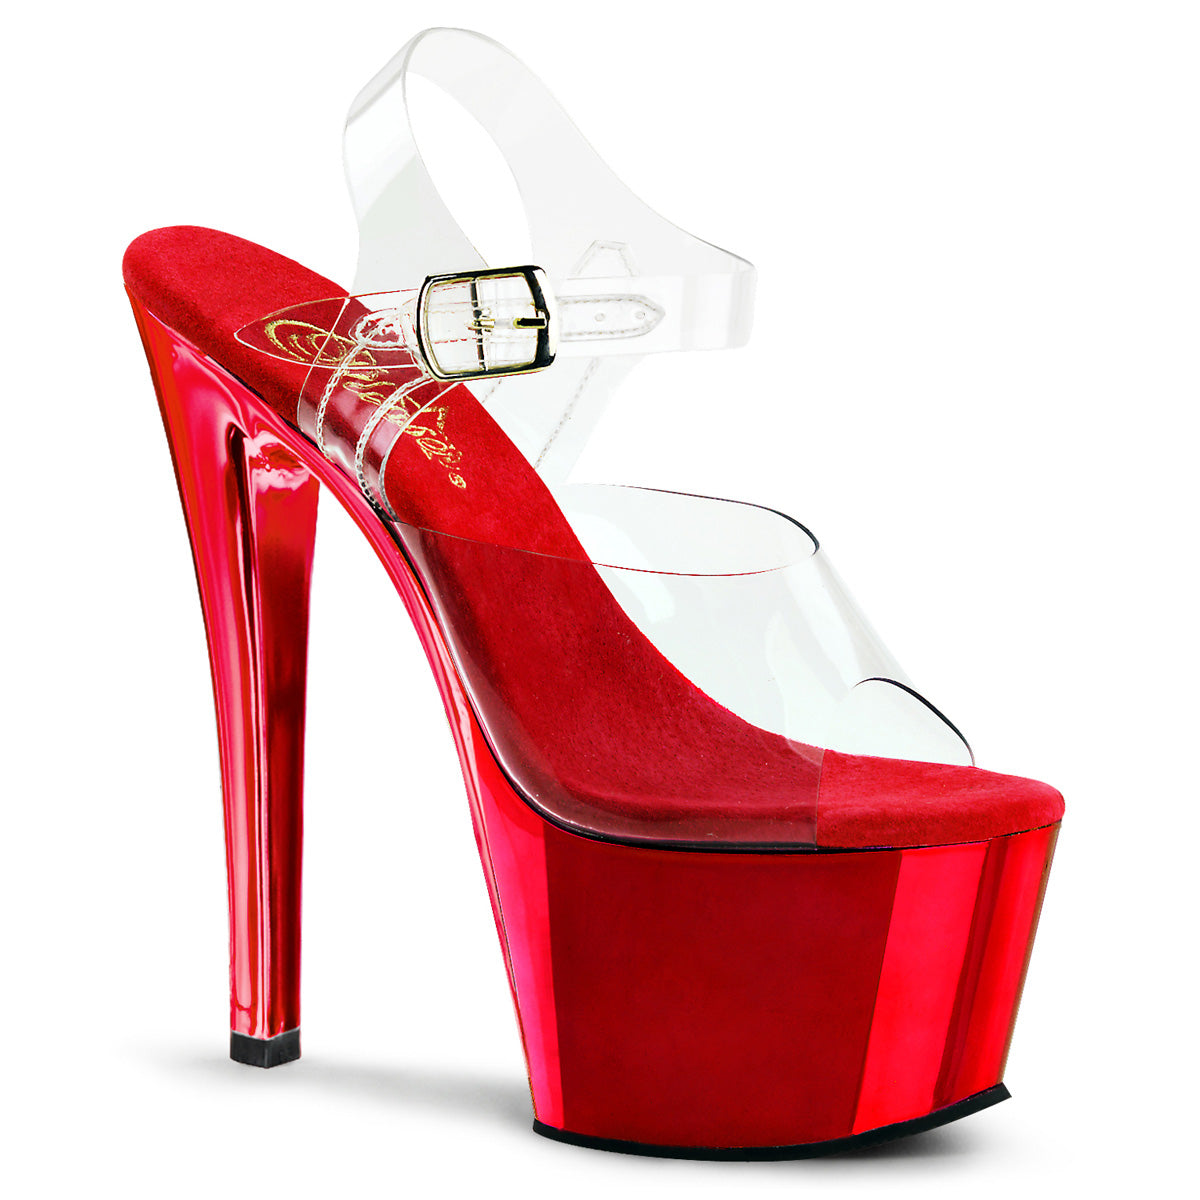 SKY-308 7" Heel Clear and Red Chrome Stripper Platforms High Heels